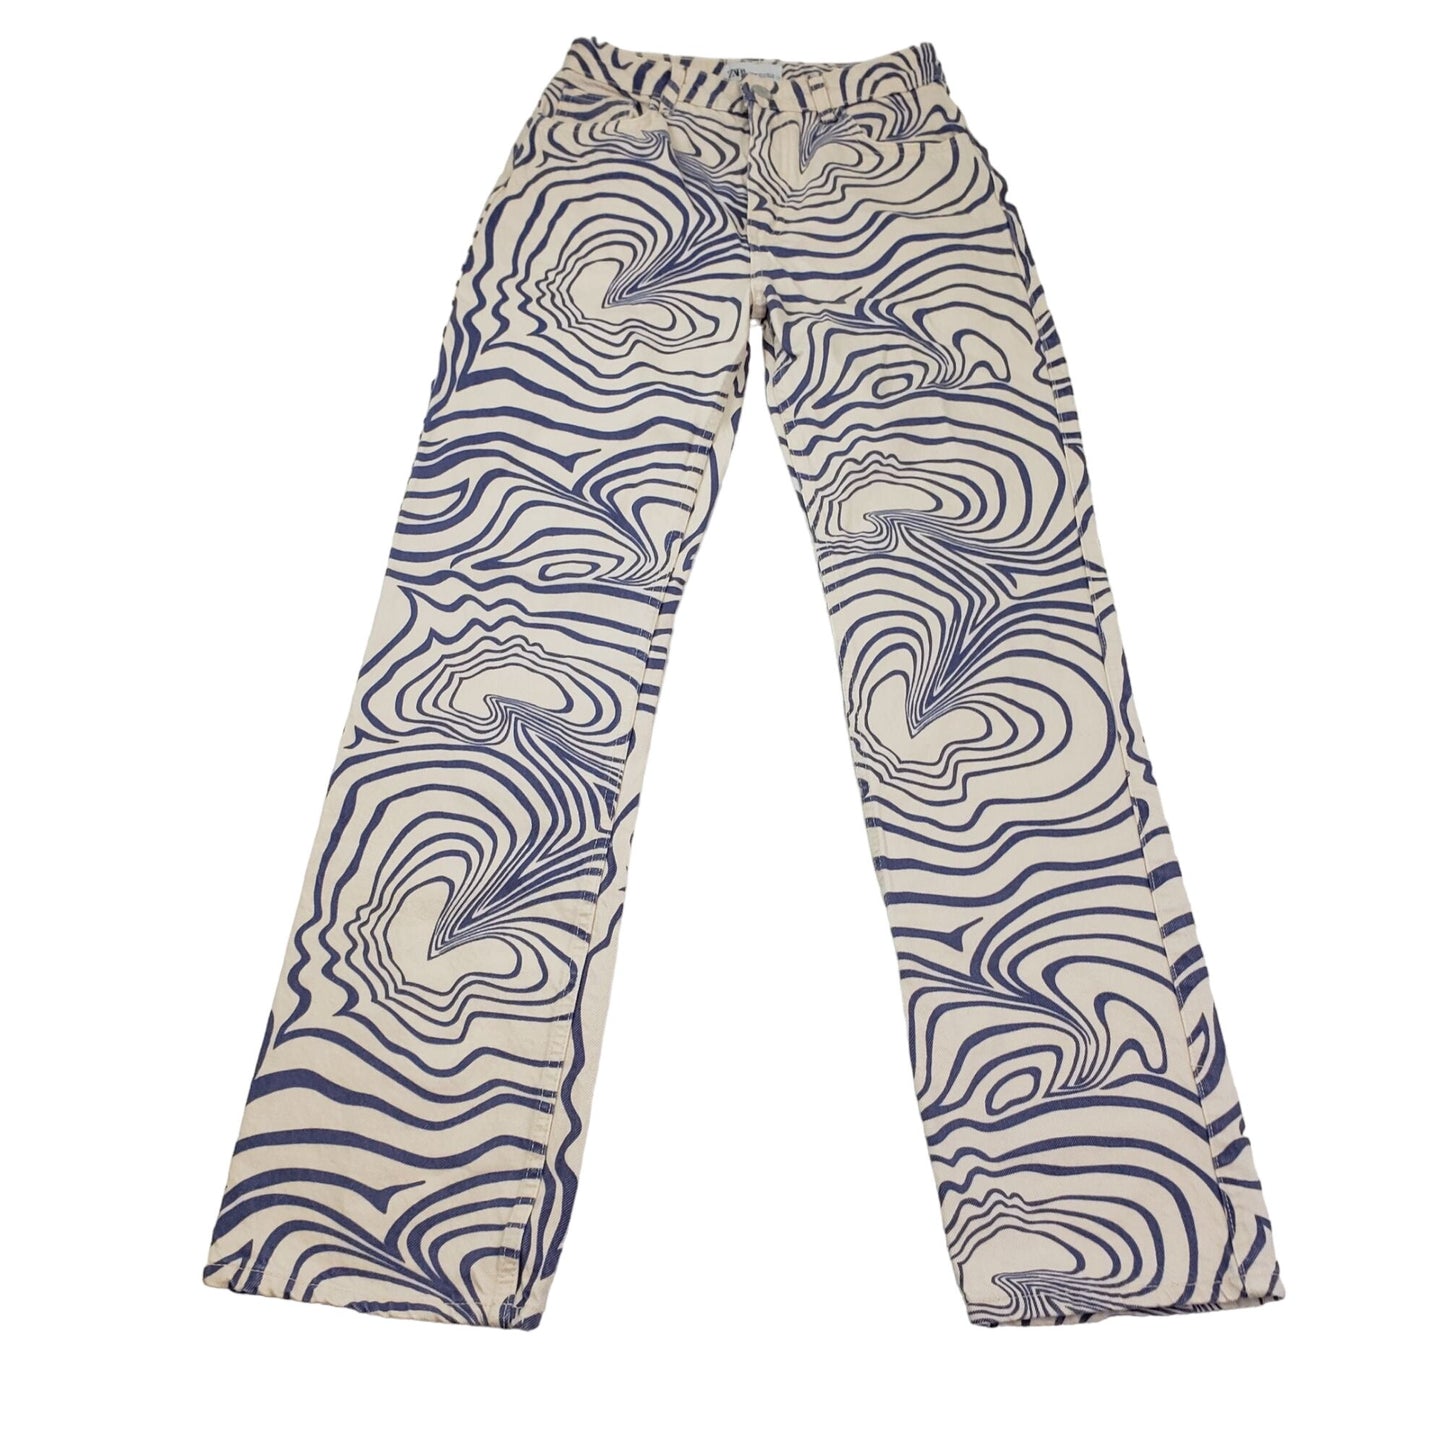 Zara 60's Inspired Wavy Print High Rise Relaxed Fit Jeans Size 2